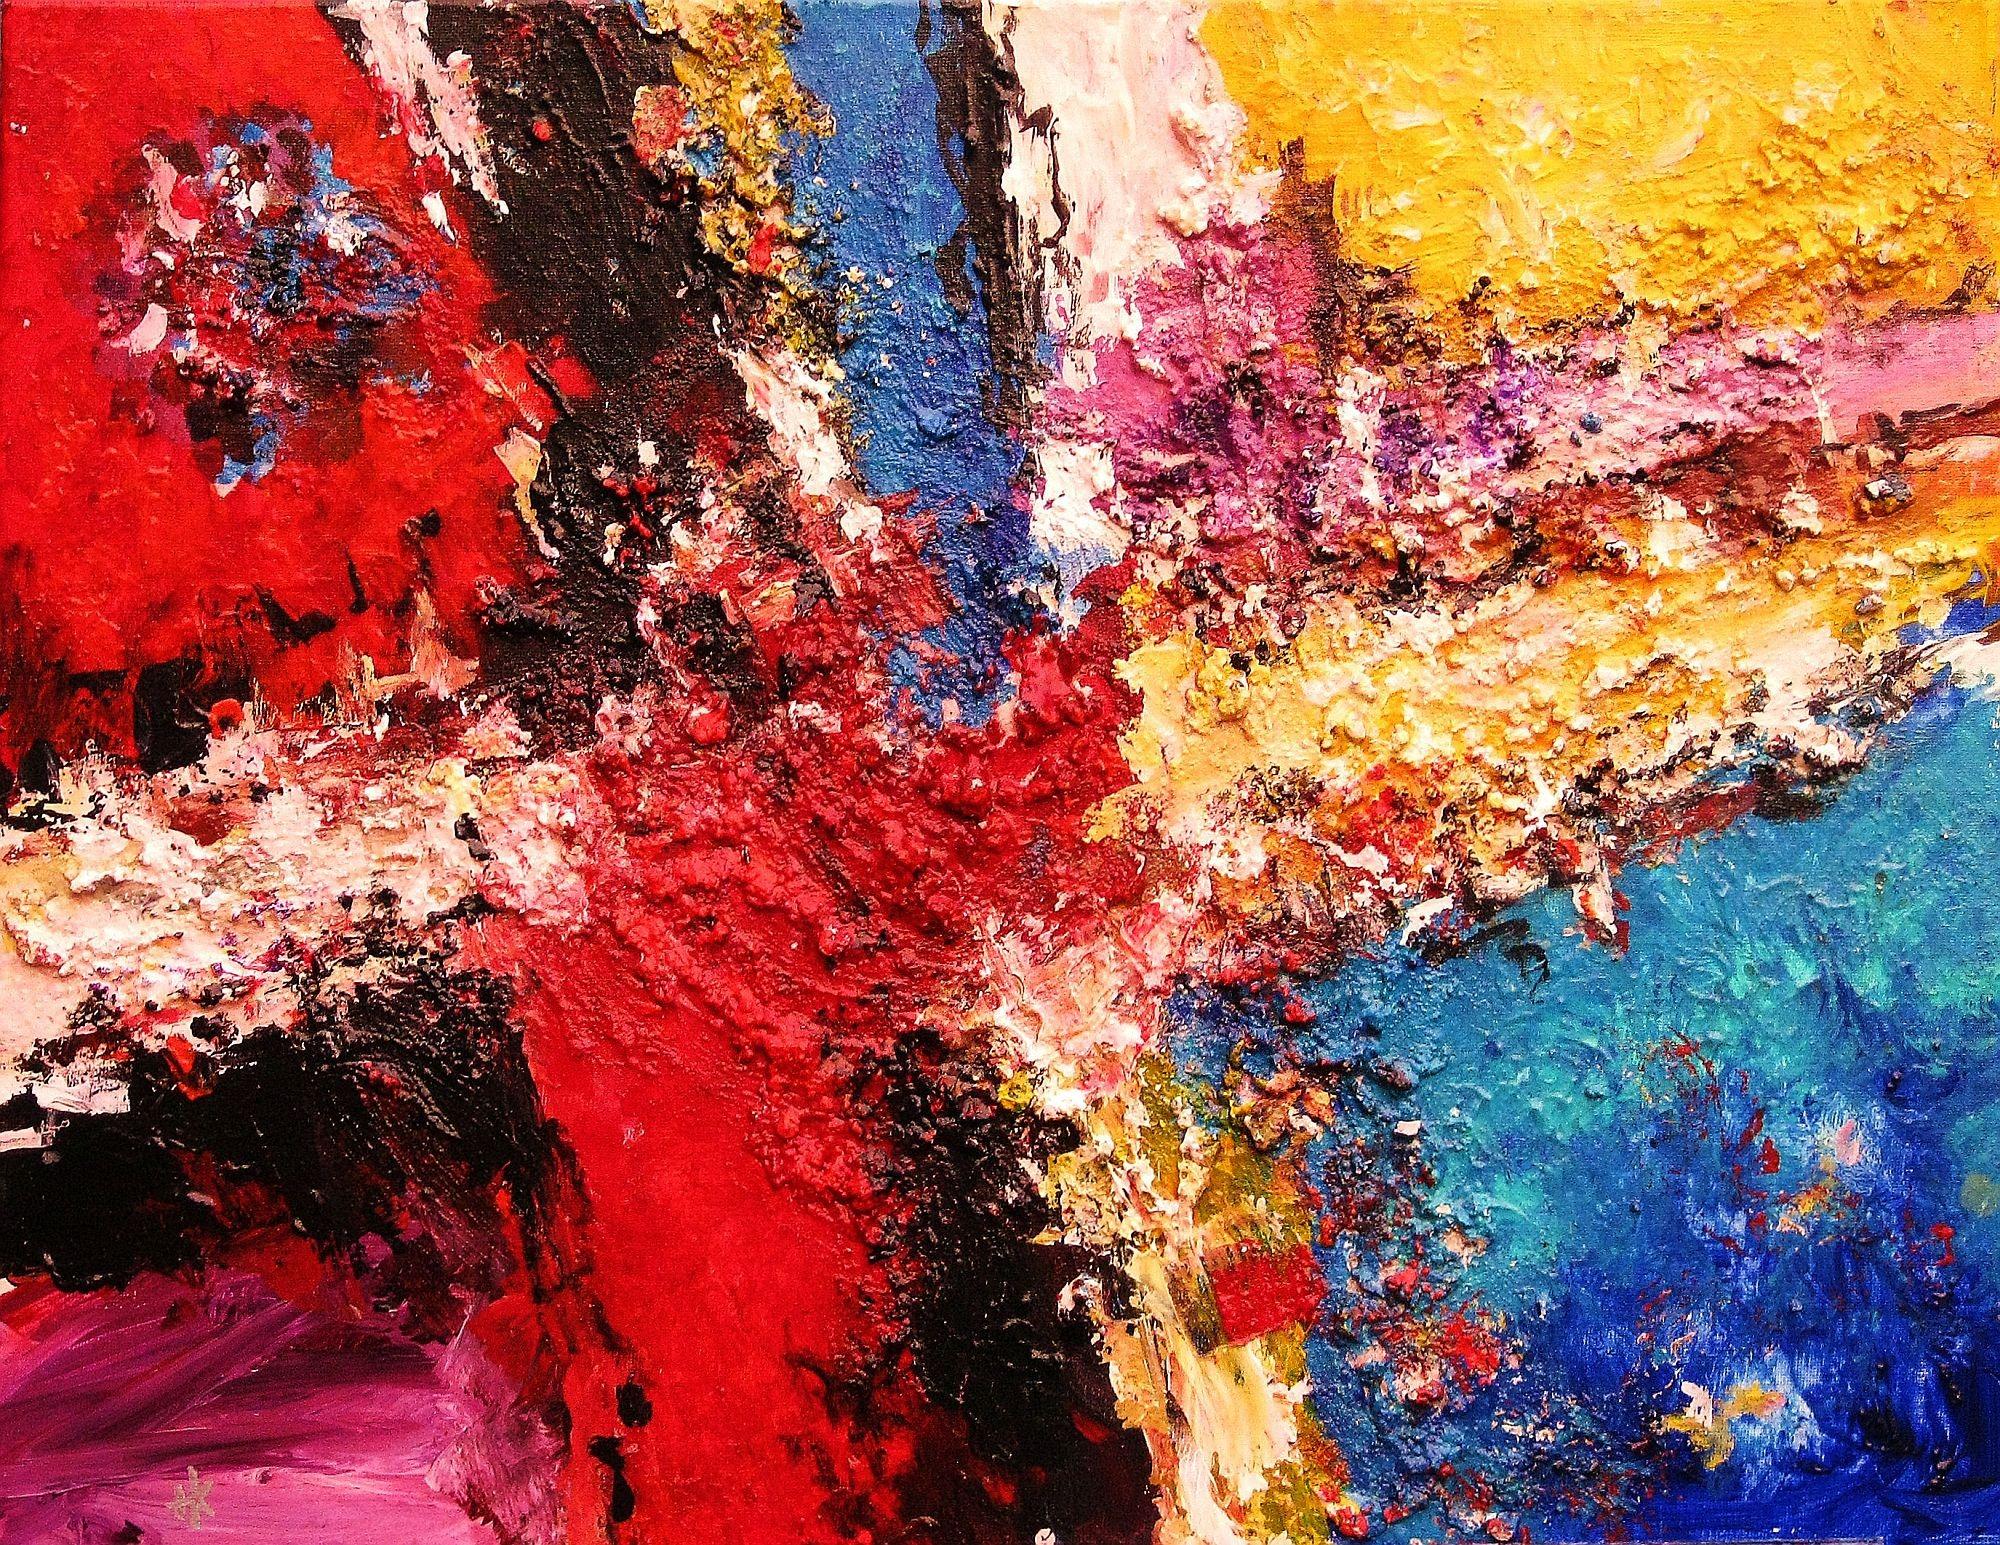 HelenKagan6. Contemplation#2. Crossroads. Series Moods by Helen Kagan - Painting by Unknown